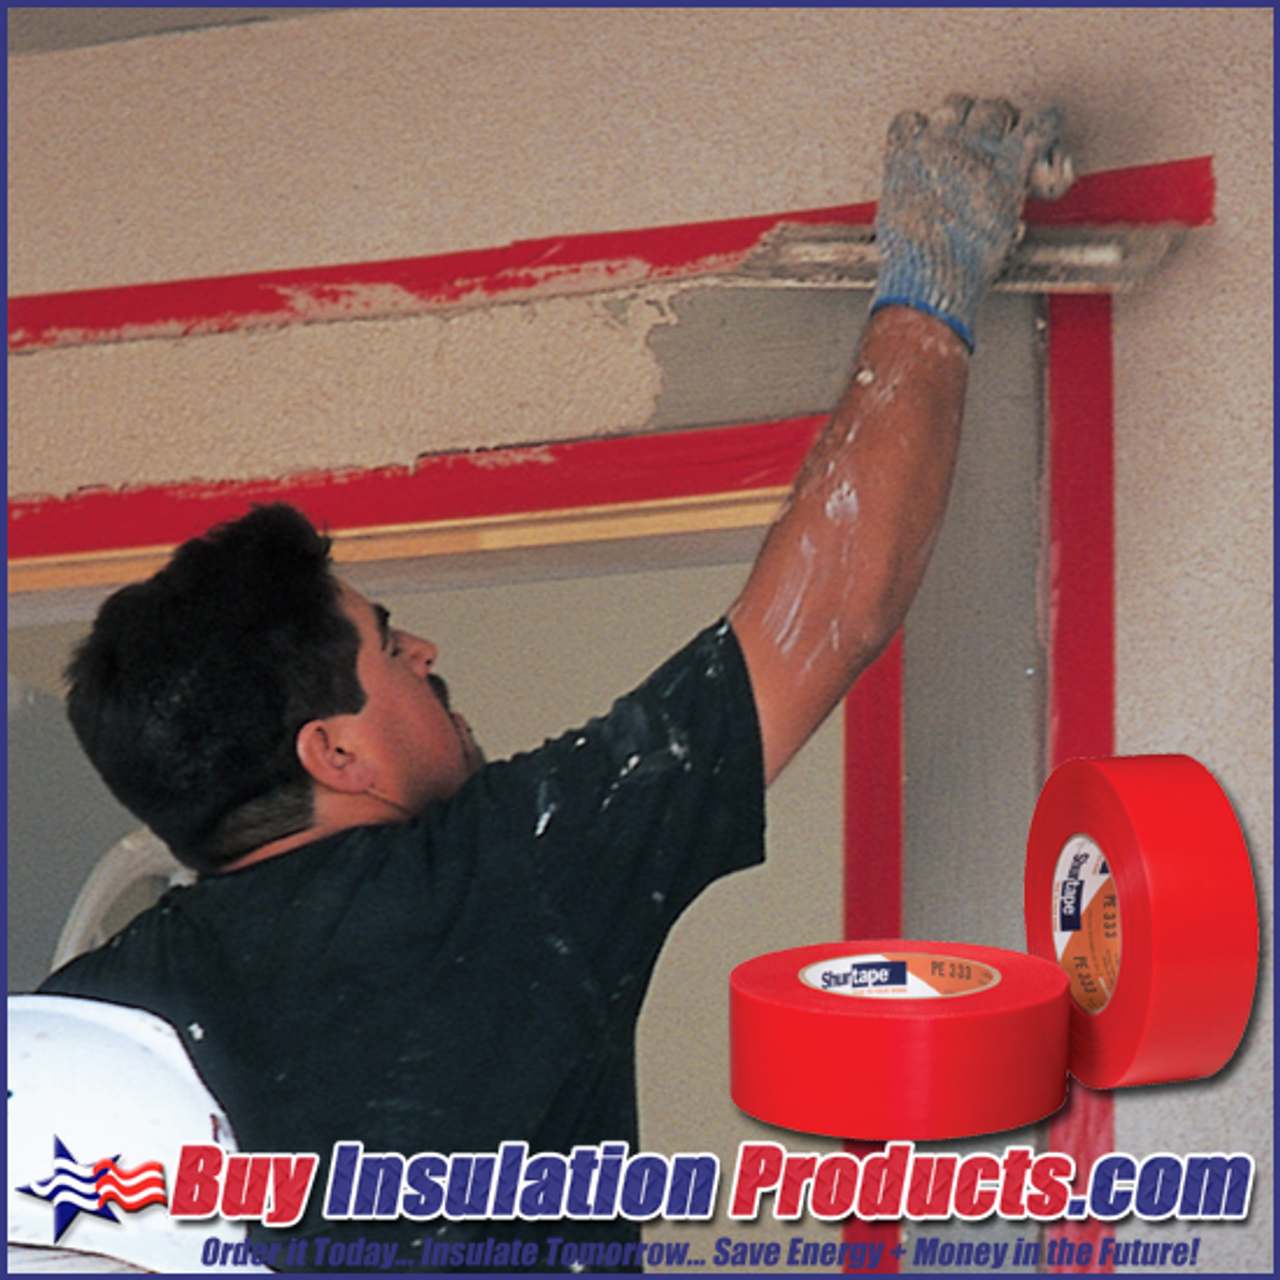 Wholesale red stucco tape For All Your Manufacturing Needs 